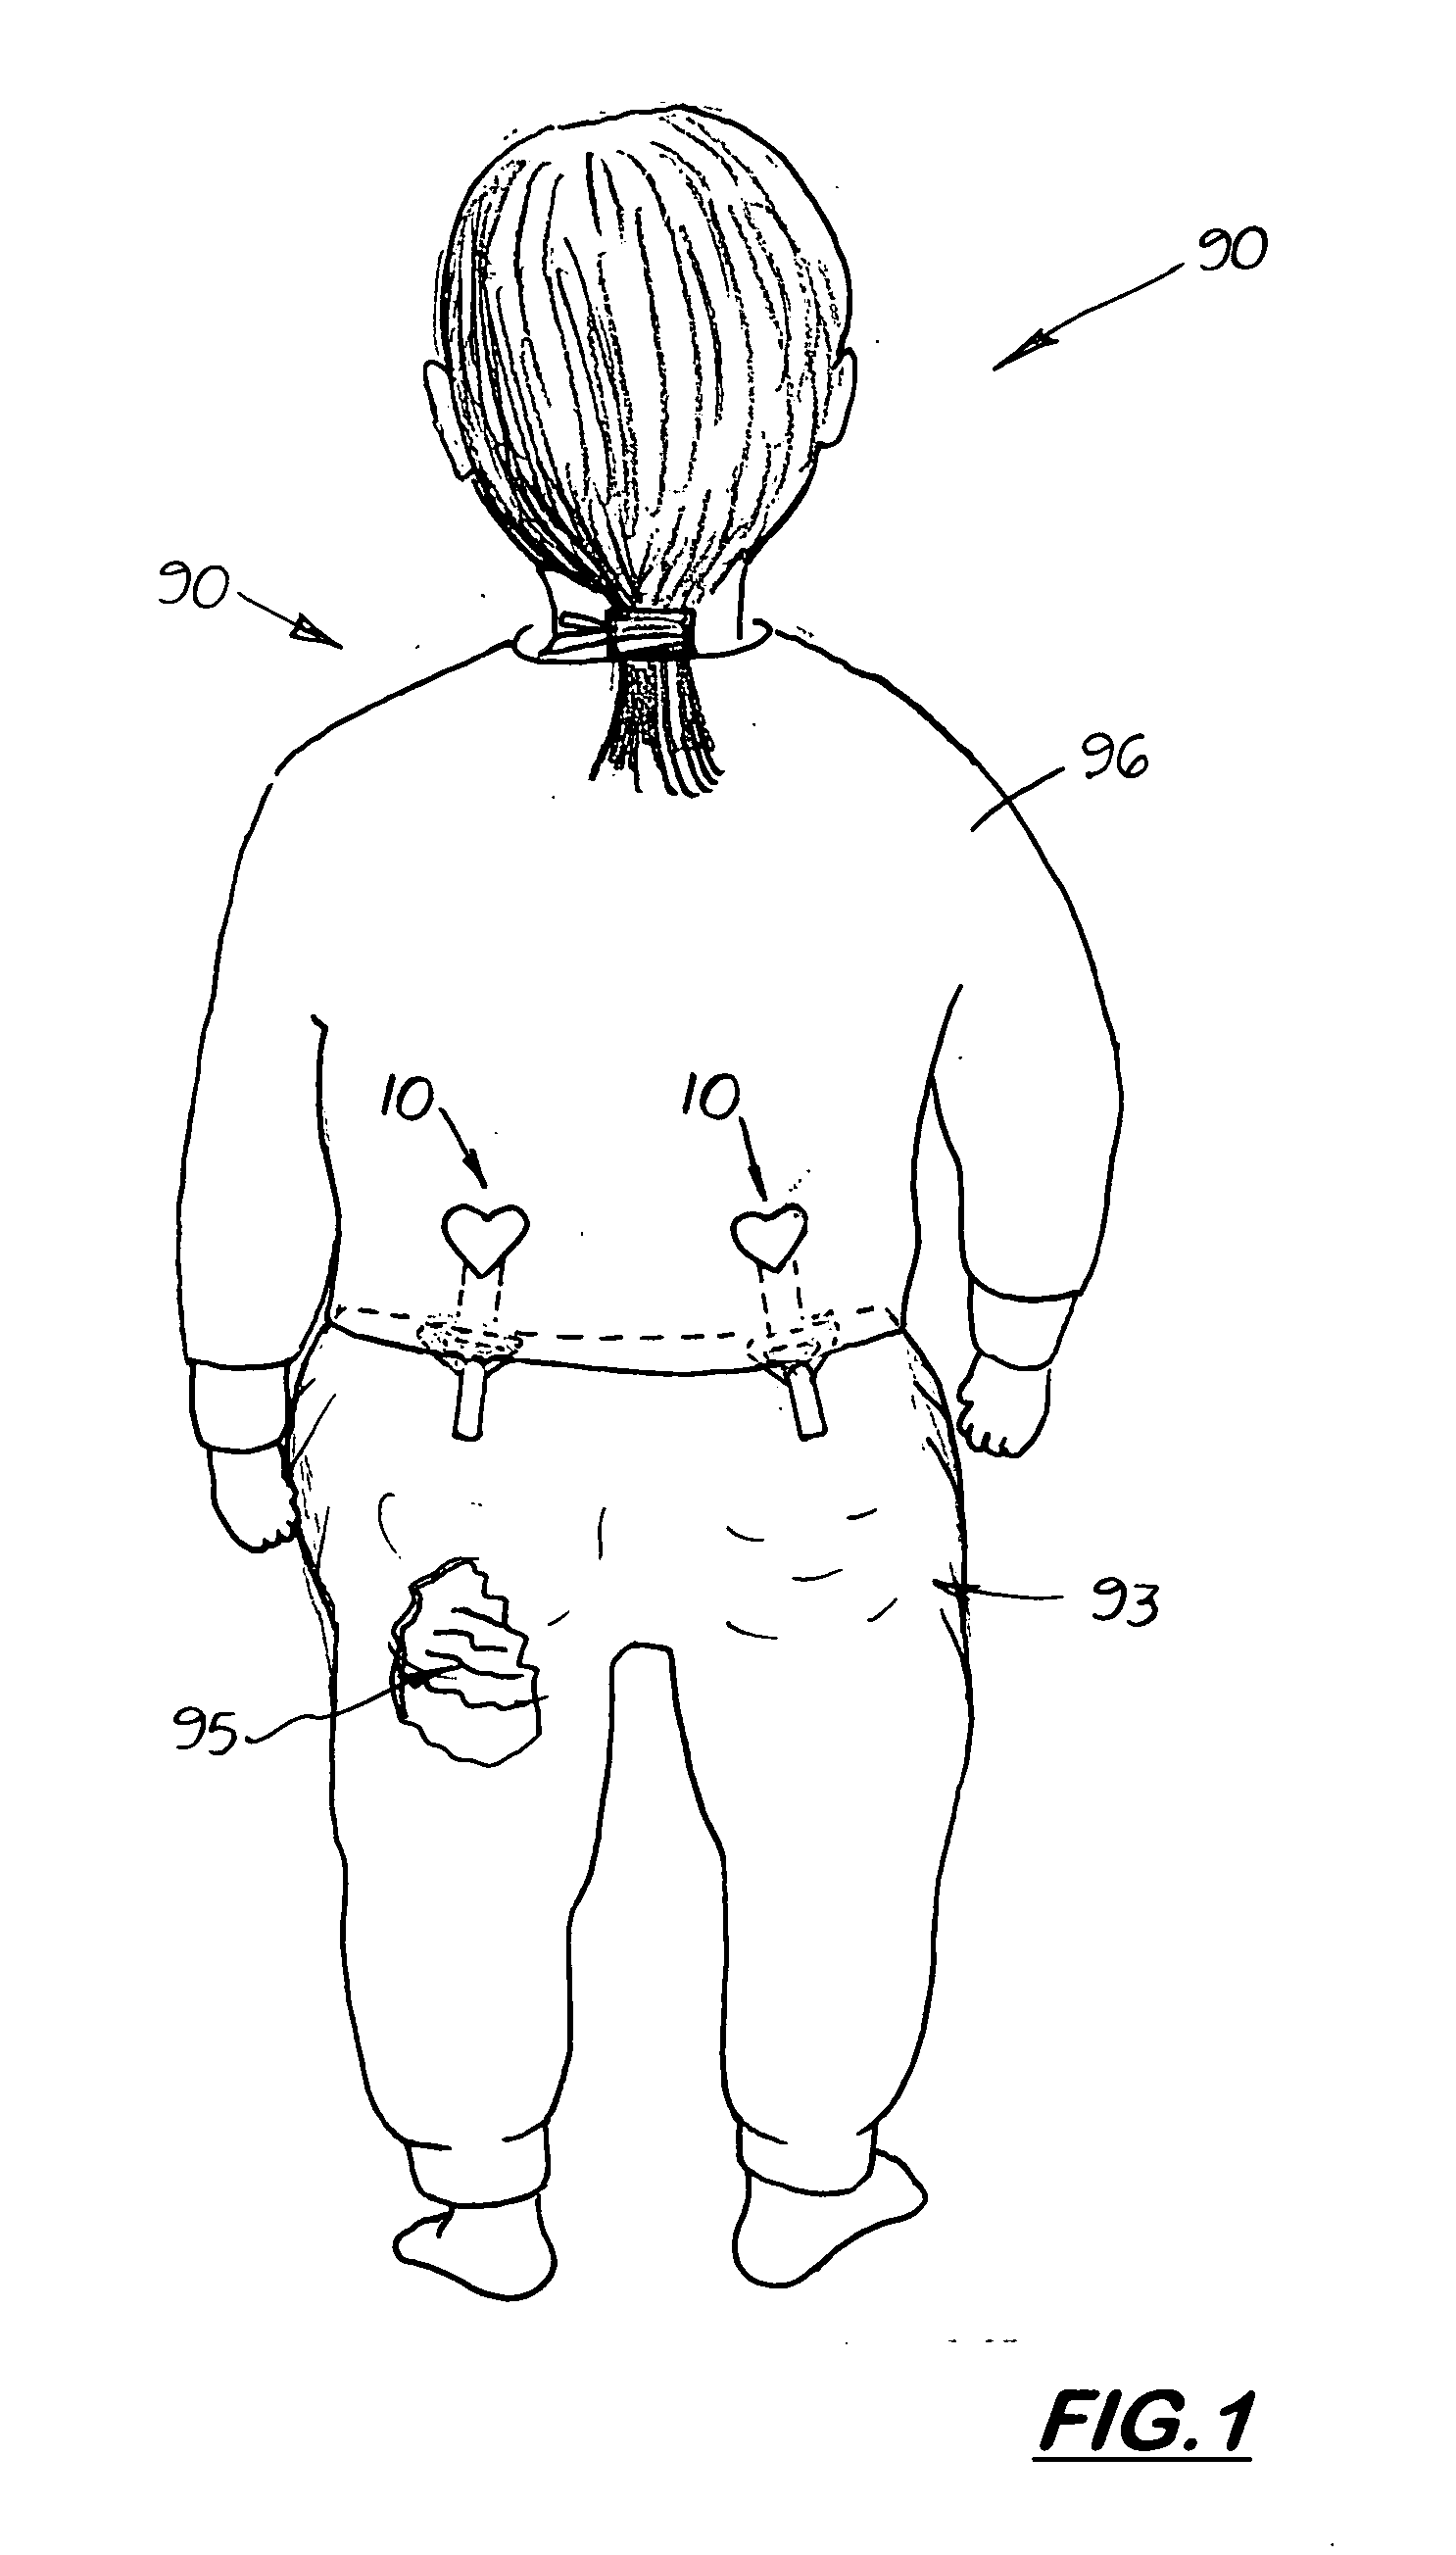 Garment strap assembly and pants holding method